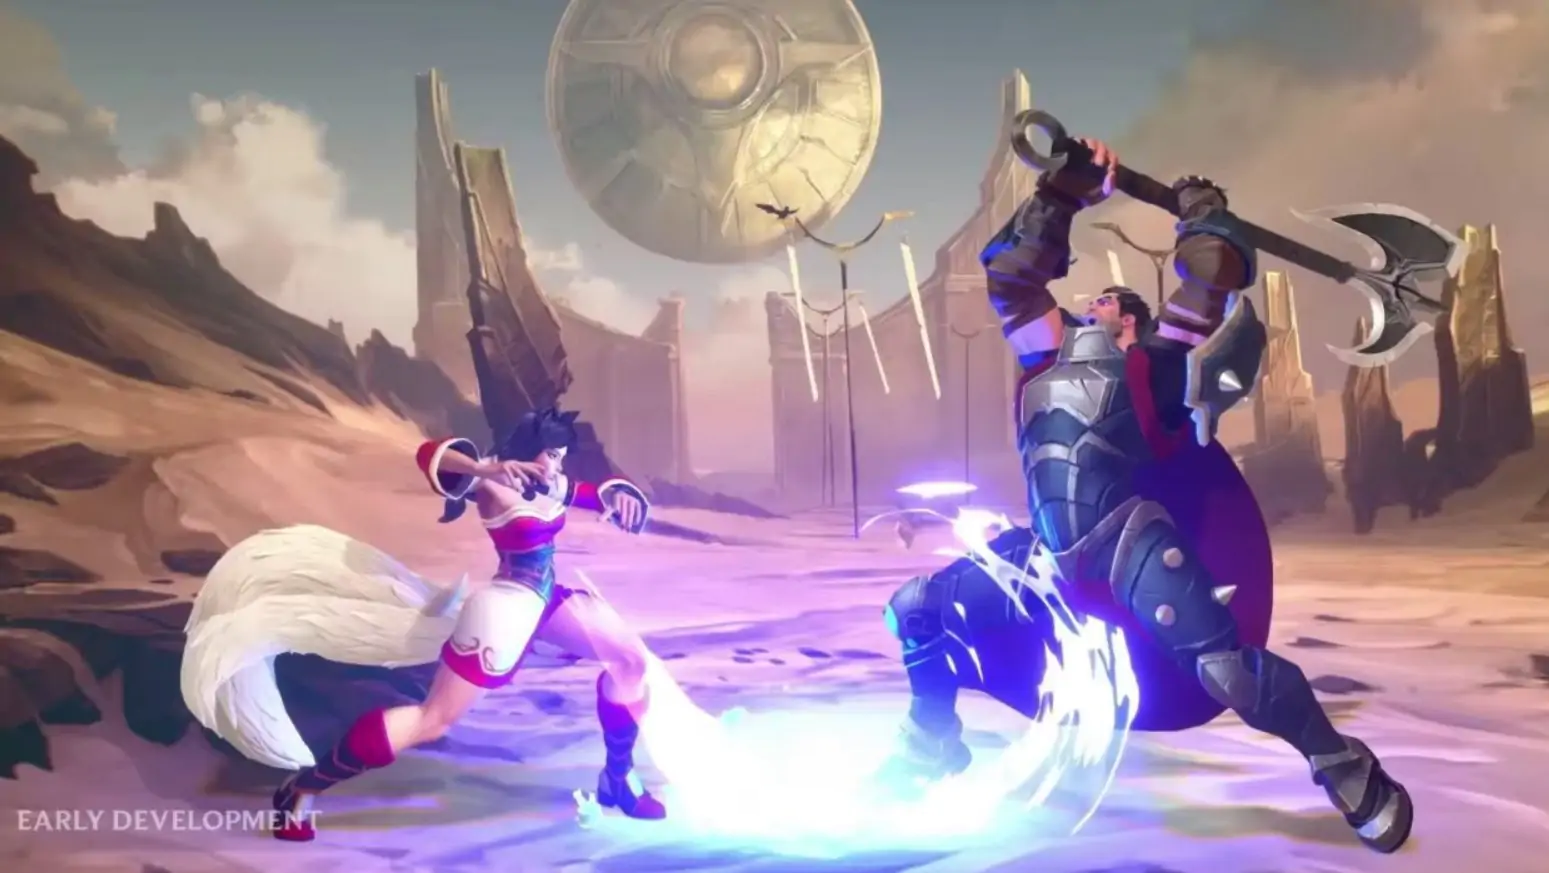 Fighting game from Riot Games will be conditionally free of charge